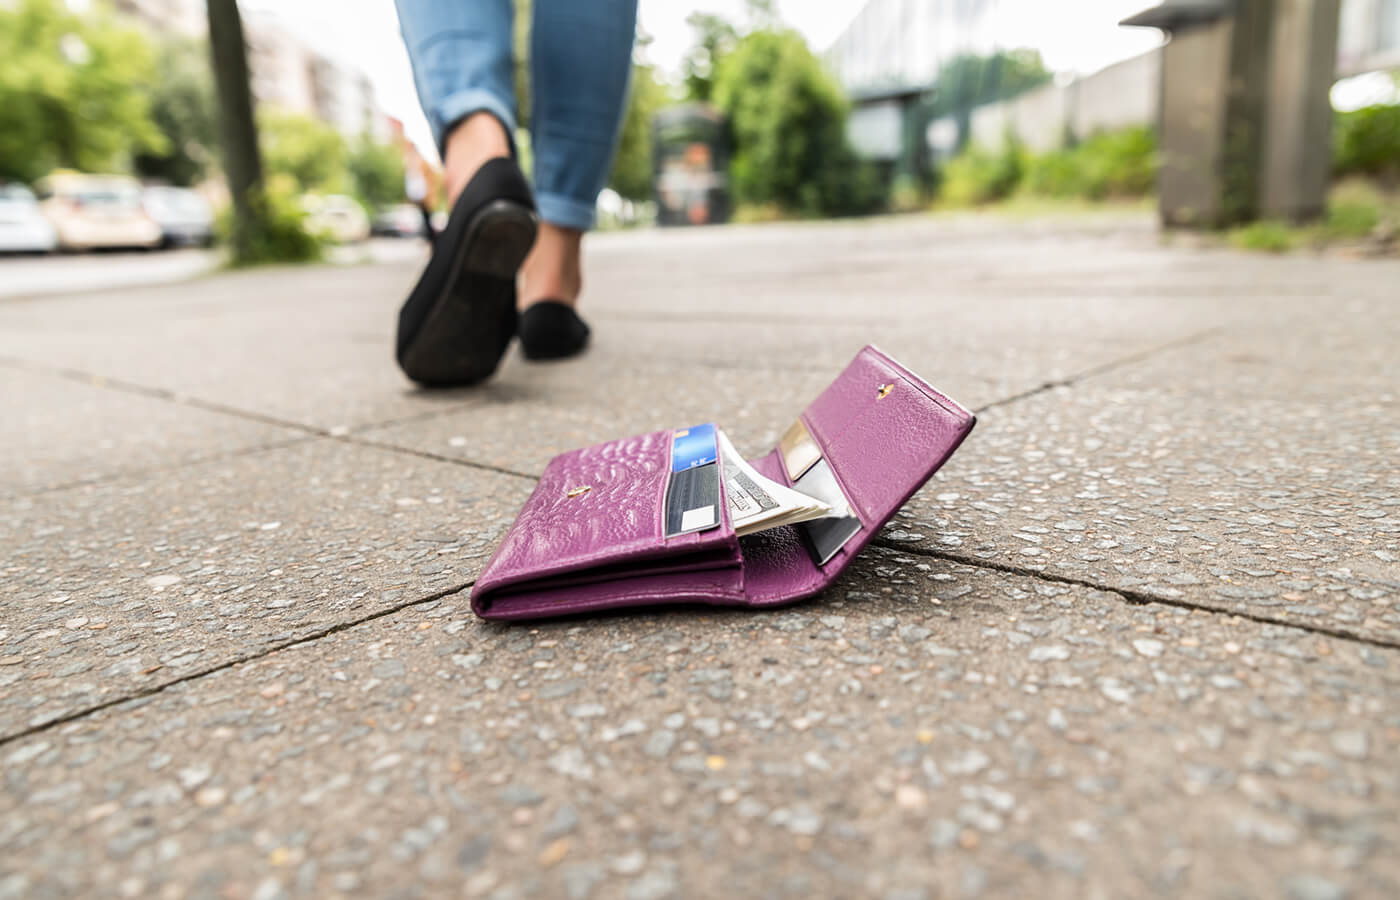 Lost or Stolen Wallet? Here’s What to Do